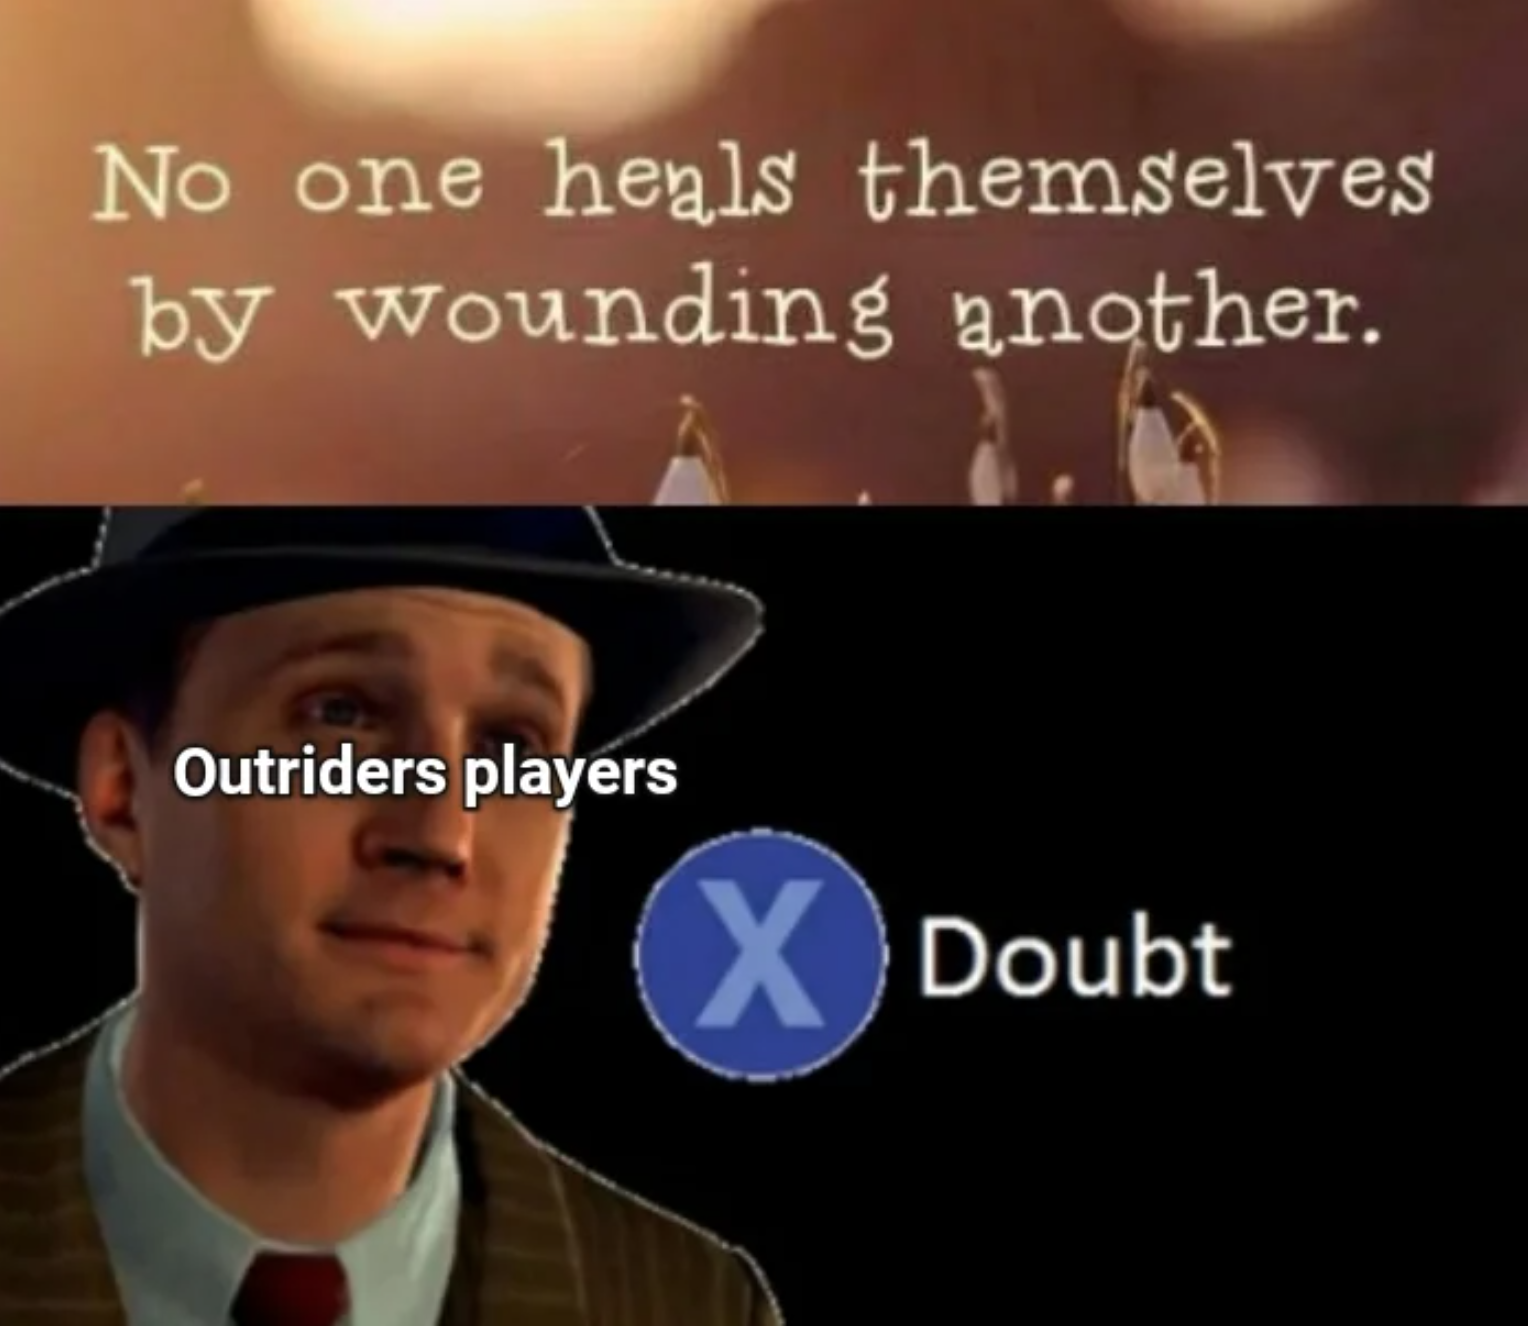 Outriders Memes - photo caption - No one heals themselves by wounding another. Outriders players X Doubt